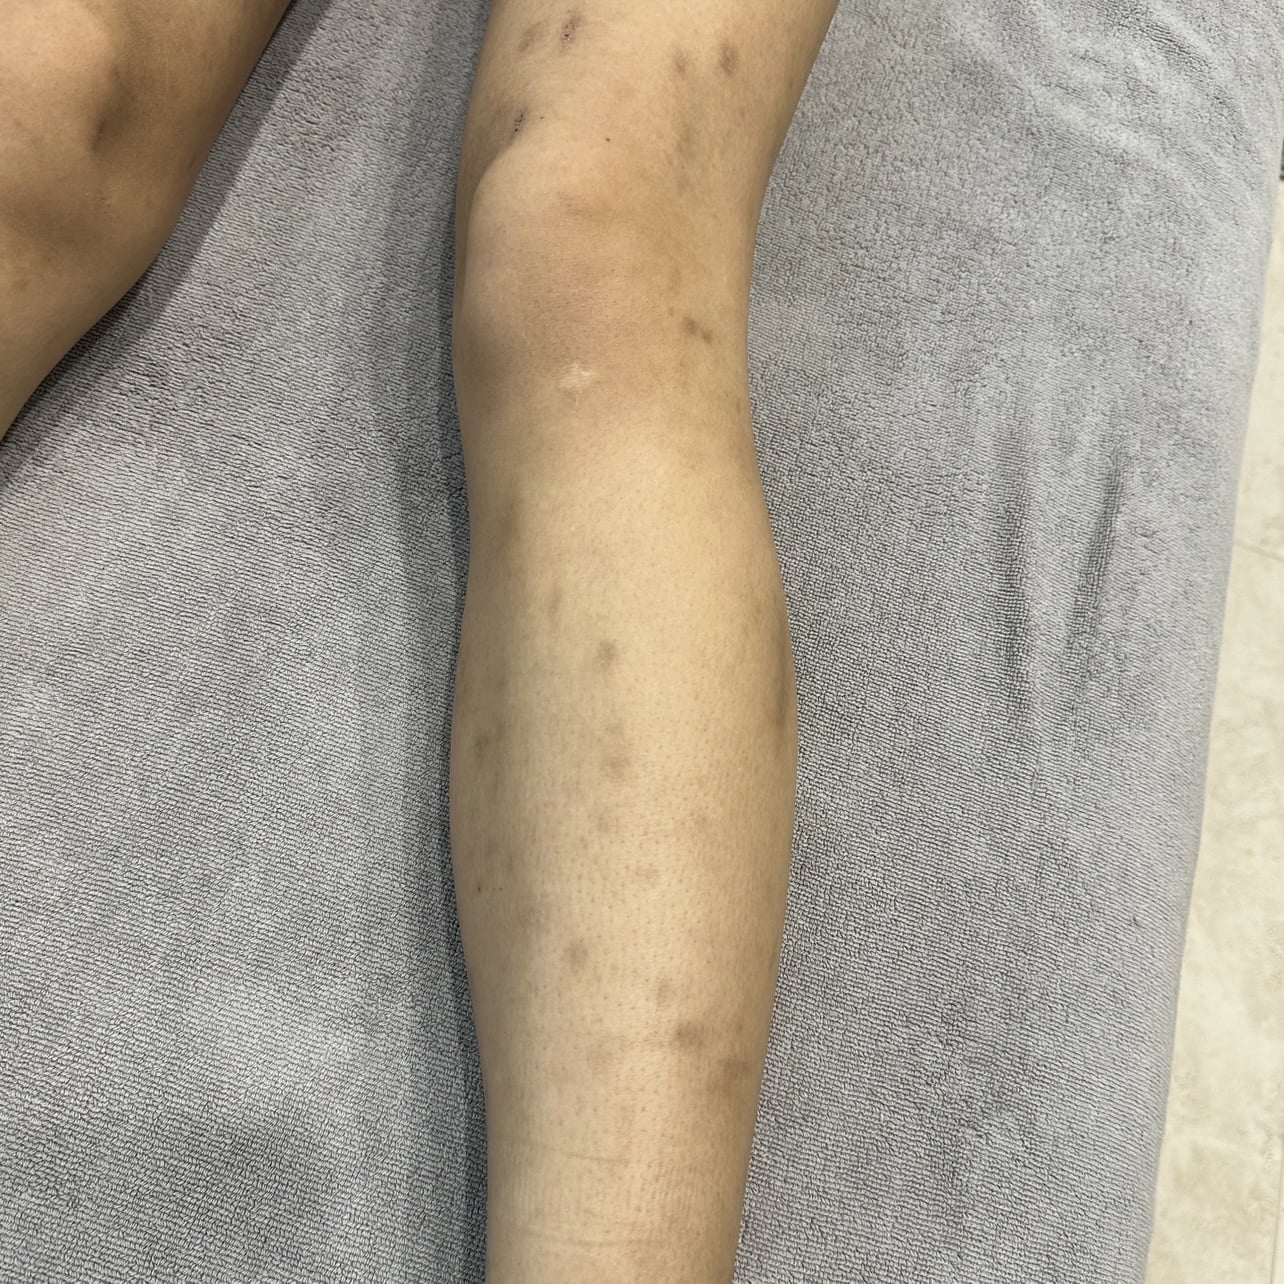 Before 3 sessions of PiQo4 leg body Laser